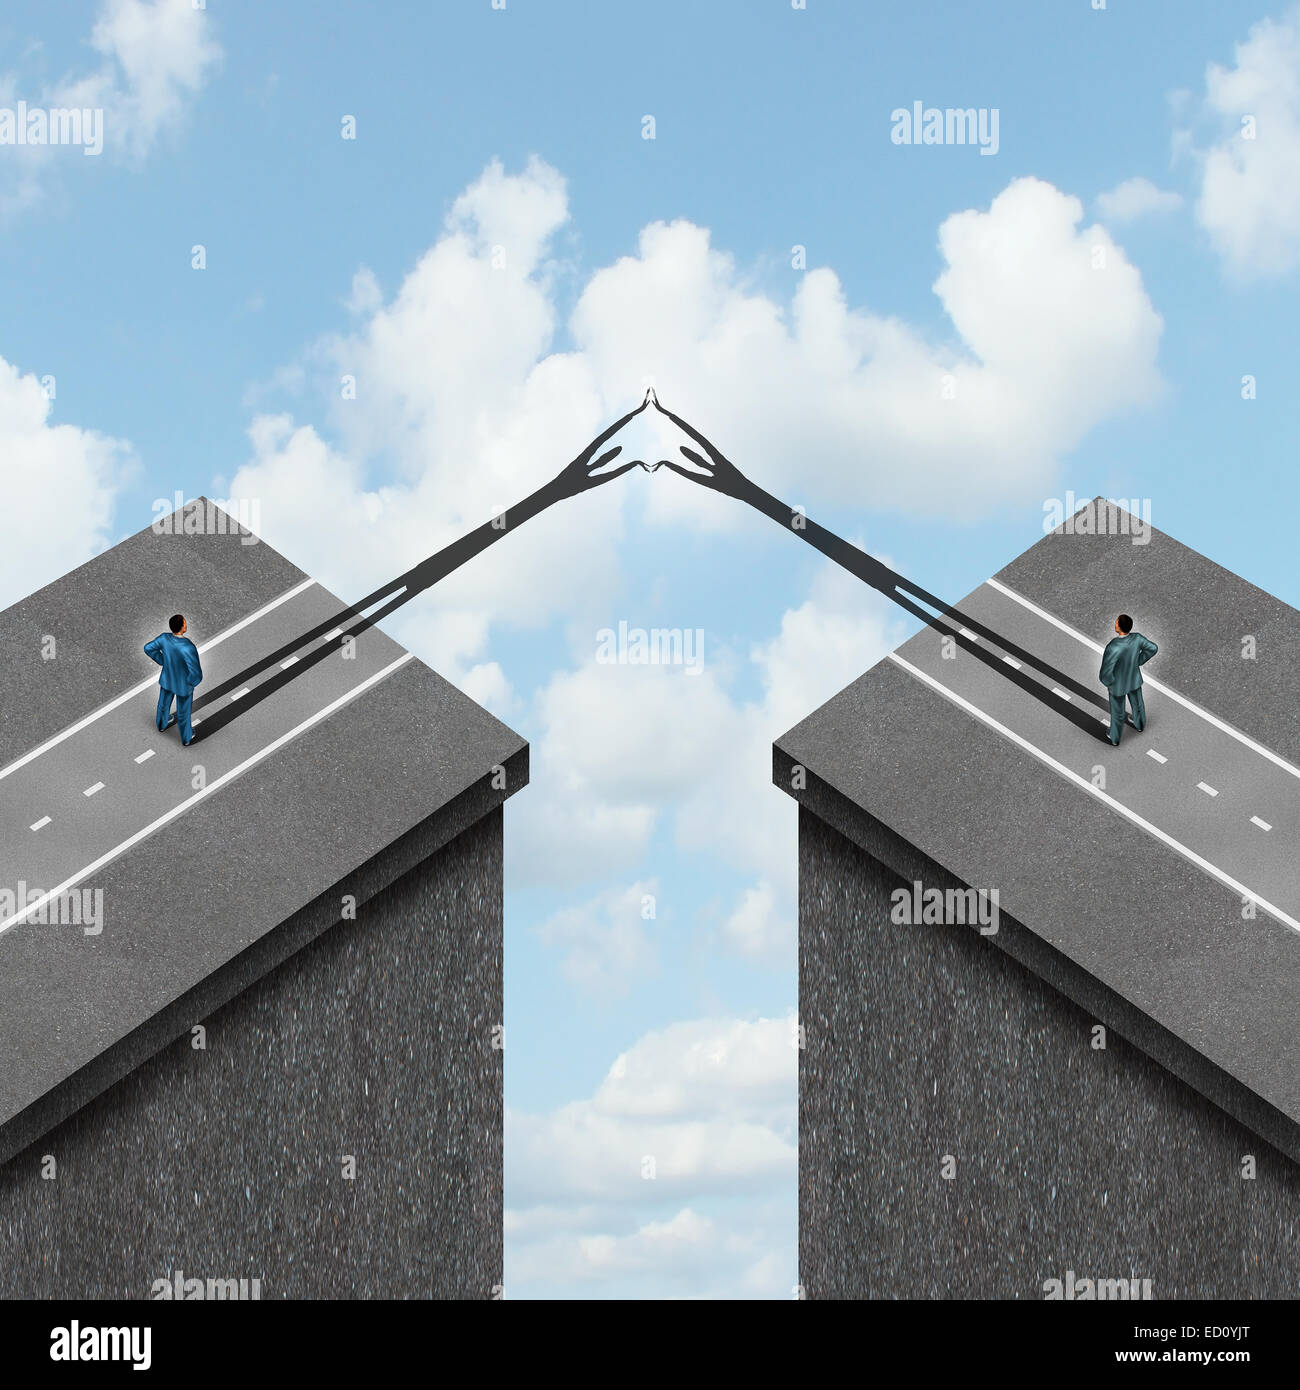 Business solution concept as a metaphor to overcome problems as bridging the gap between two financial partners as cast shadows Stock Photo